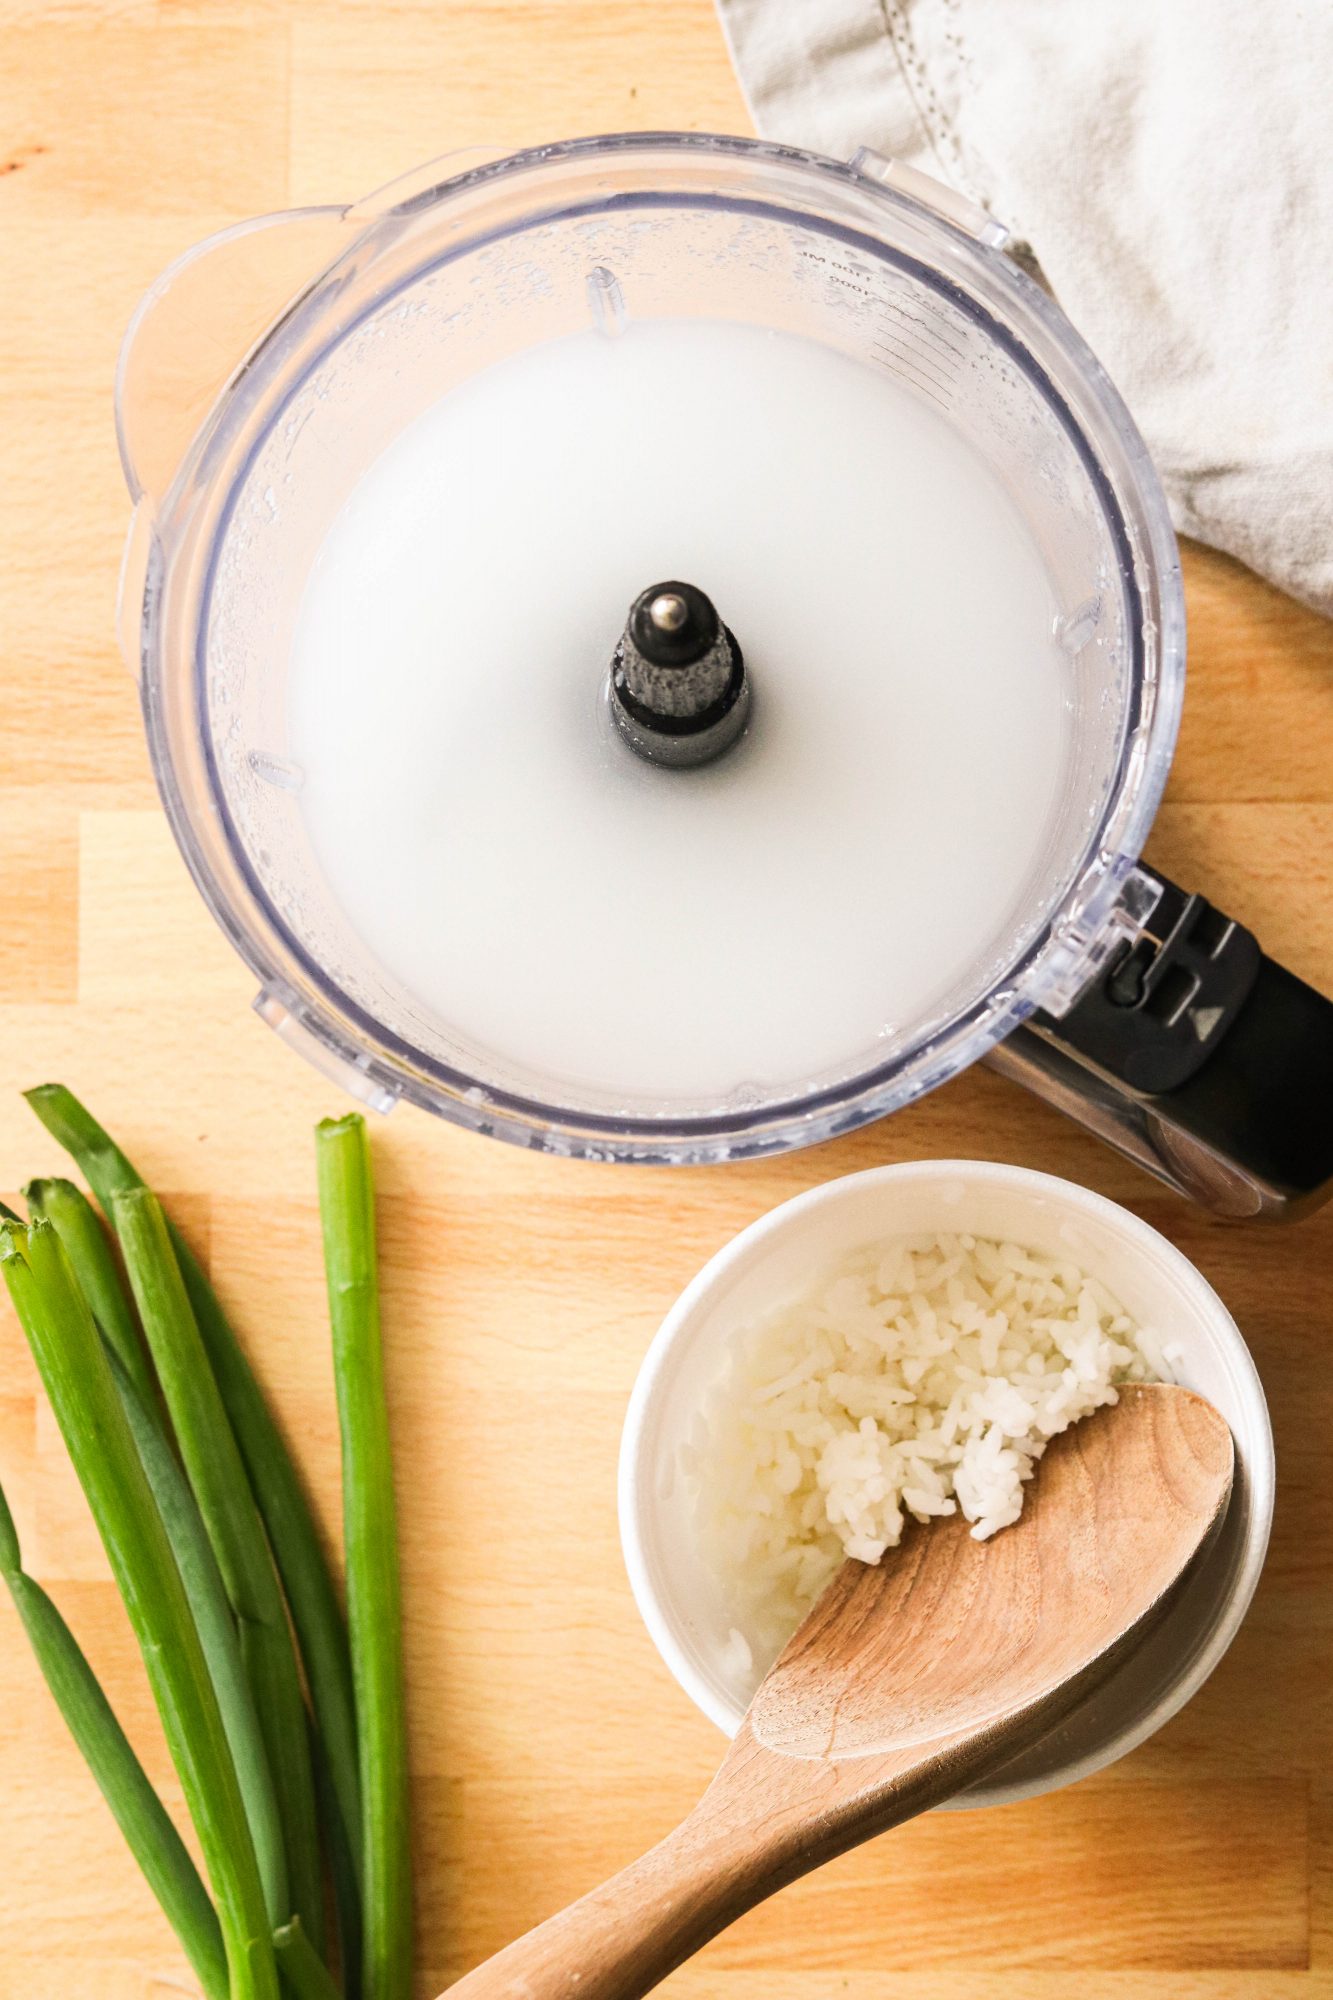 The making of leftover rice congee: blended rice and water